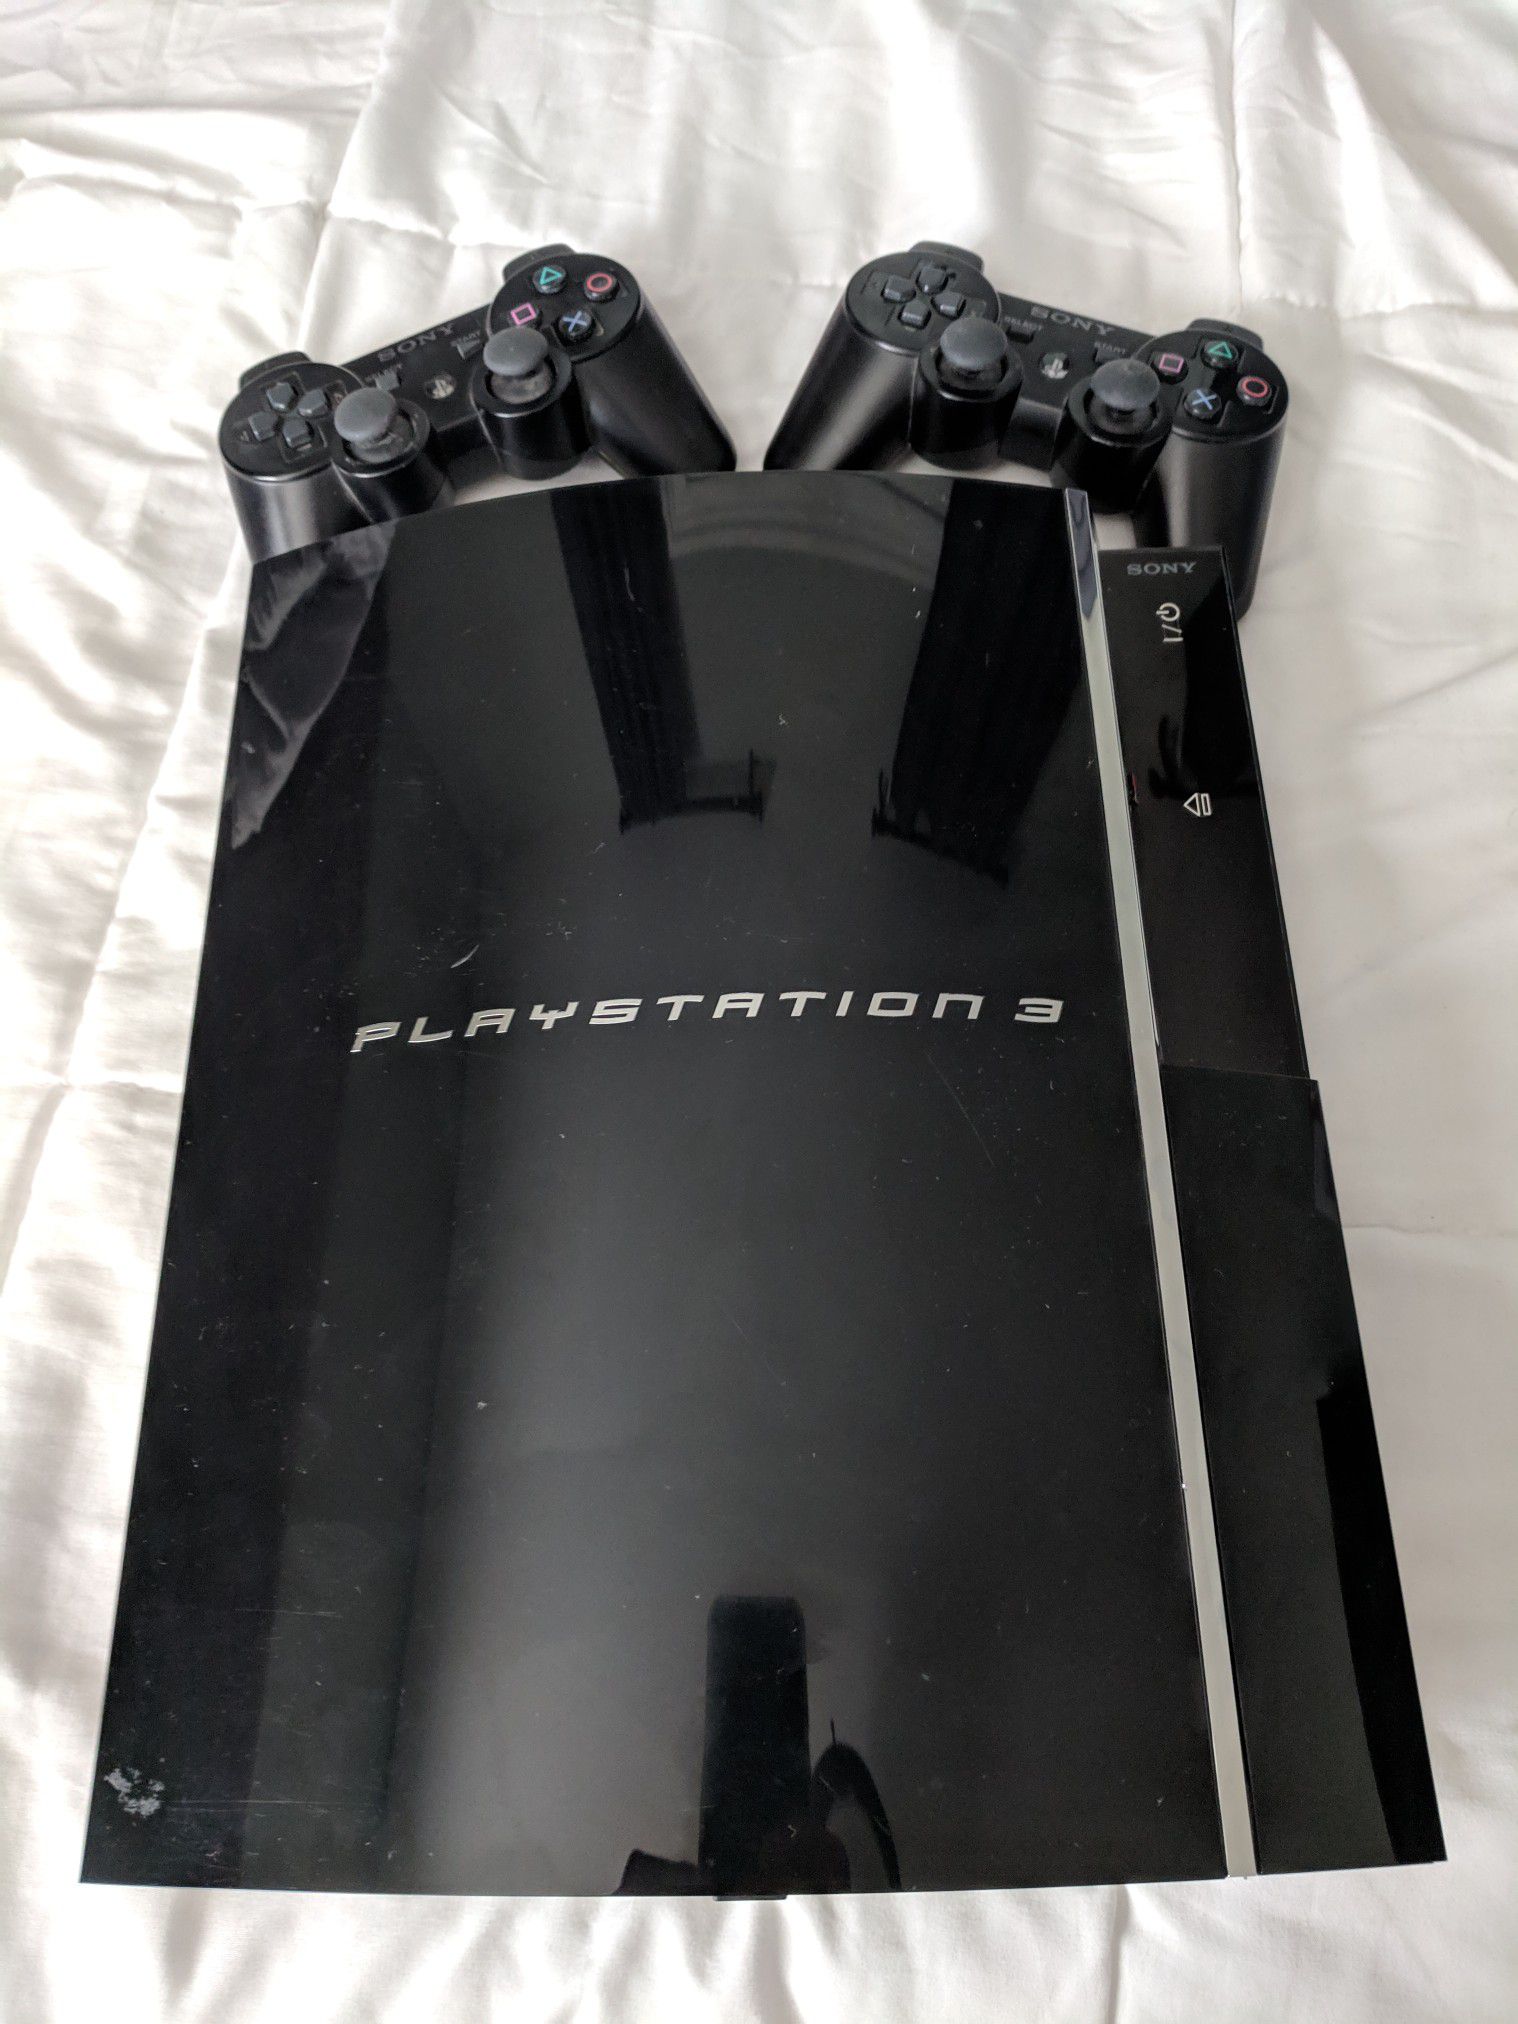 PlayStation 3 - 1st Generation 60GB CHECHA01 model. Excellent Condition w/ 2 Controllers and Cords